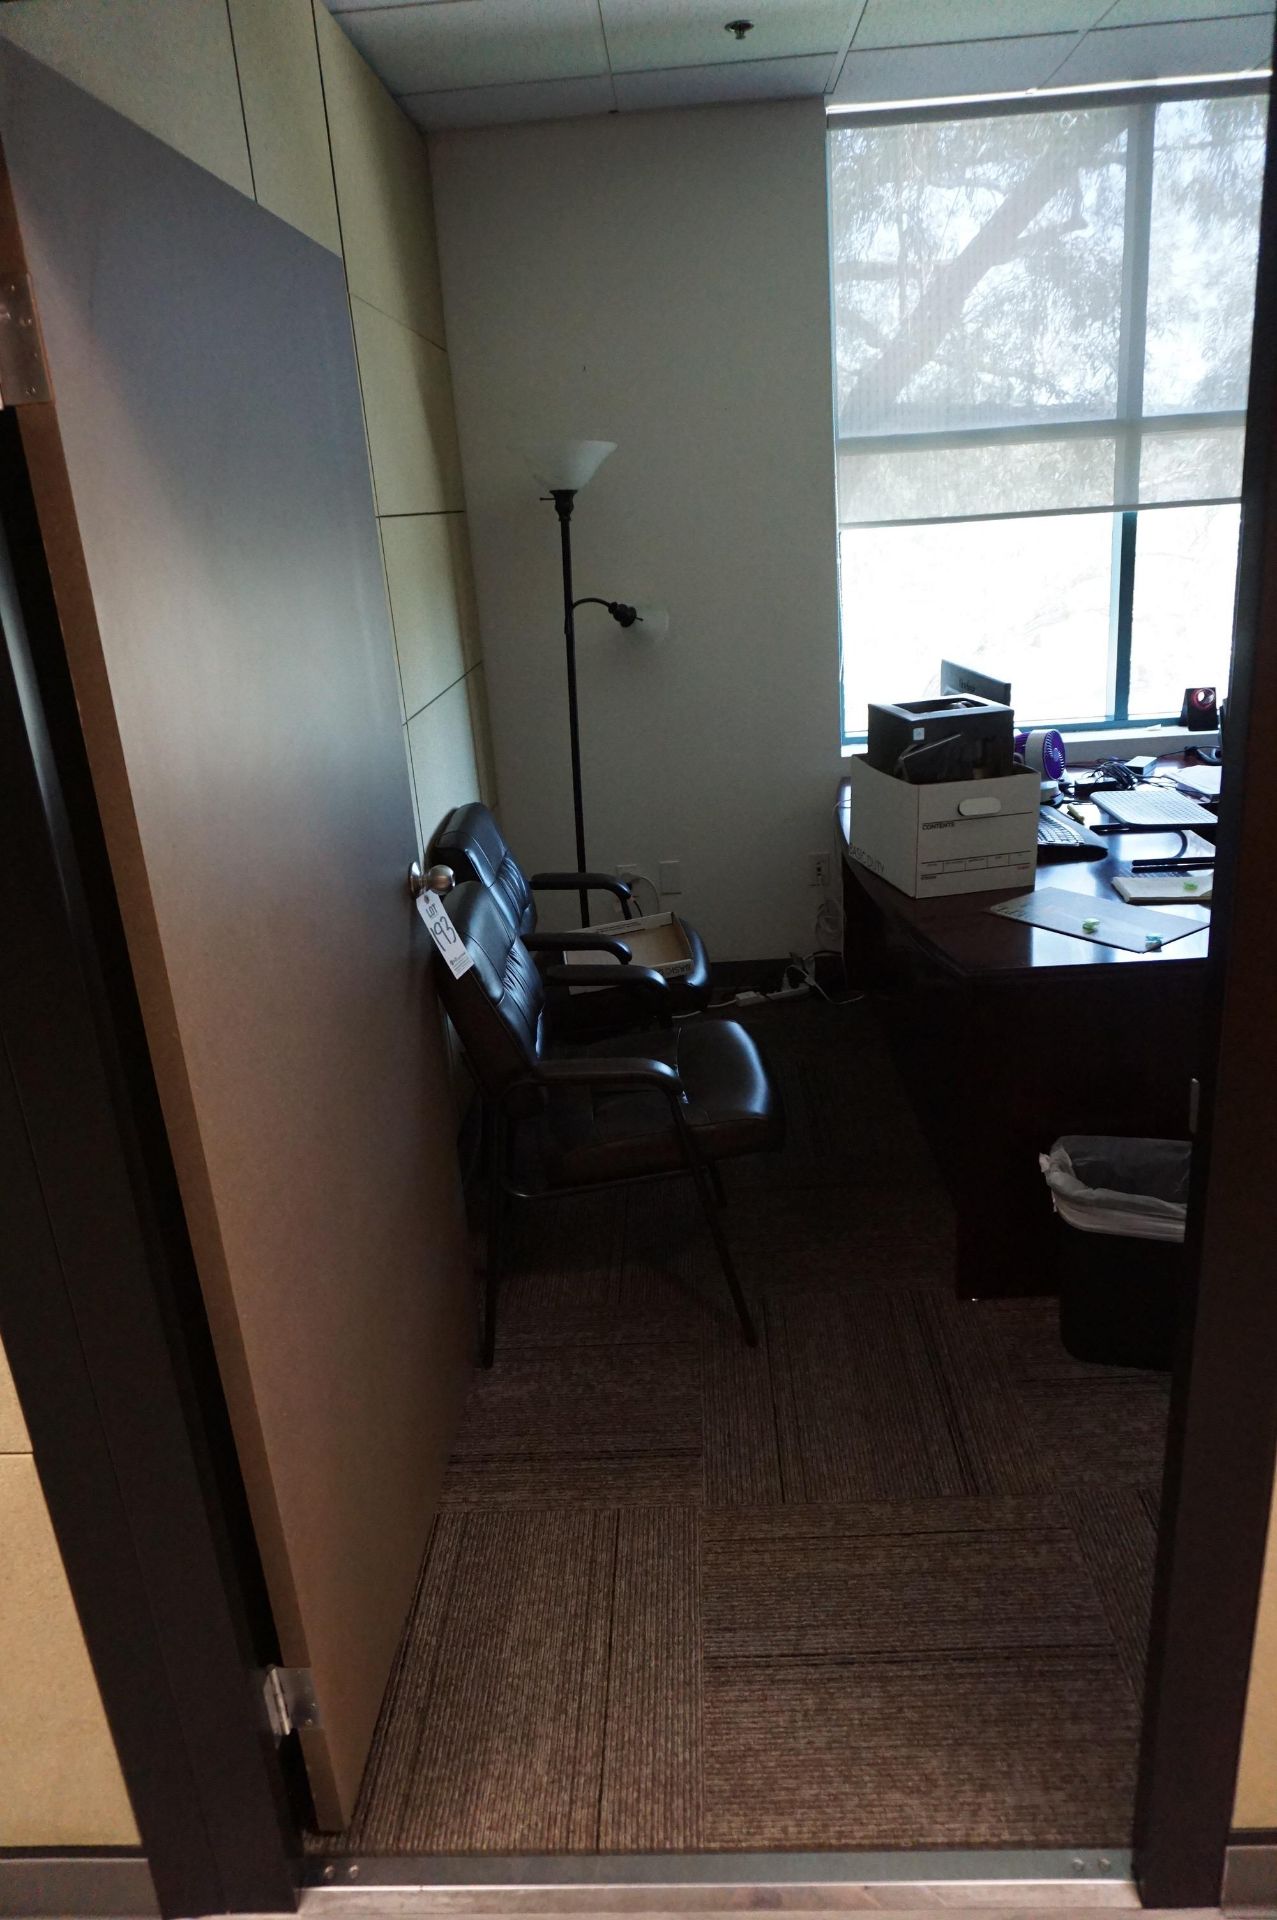 SECOND FLOOR OFFICE TO INCLUDE: HIGH END EXECUTIVE DESK, 2 MONITOR STAND KEYBOARD, EXECUTIVE